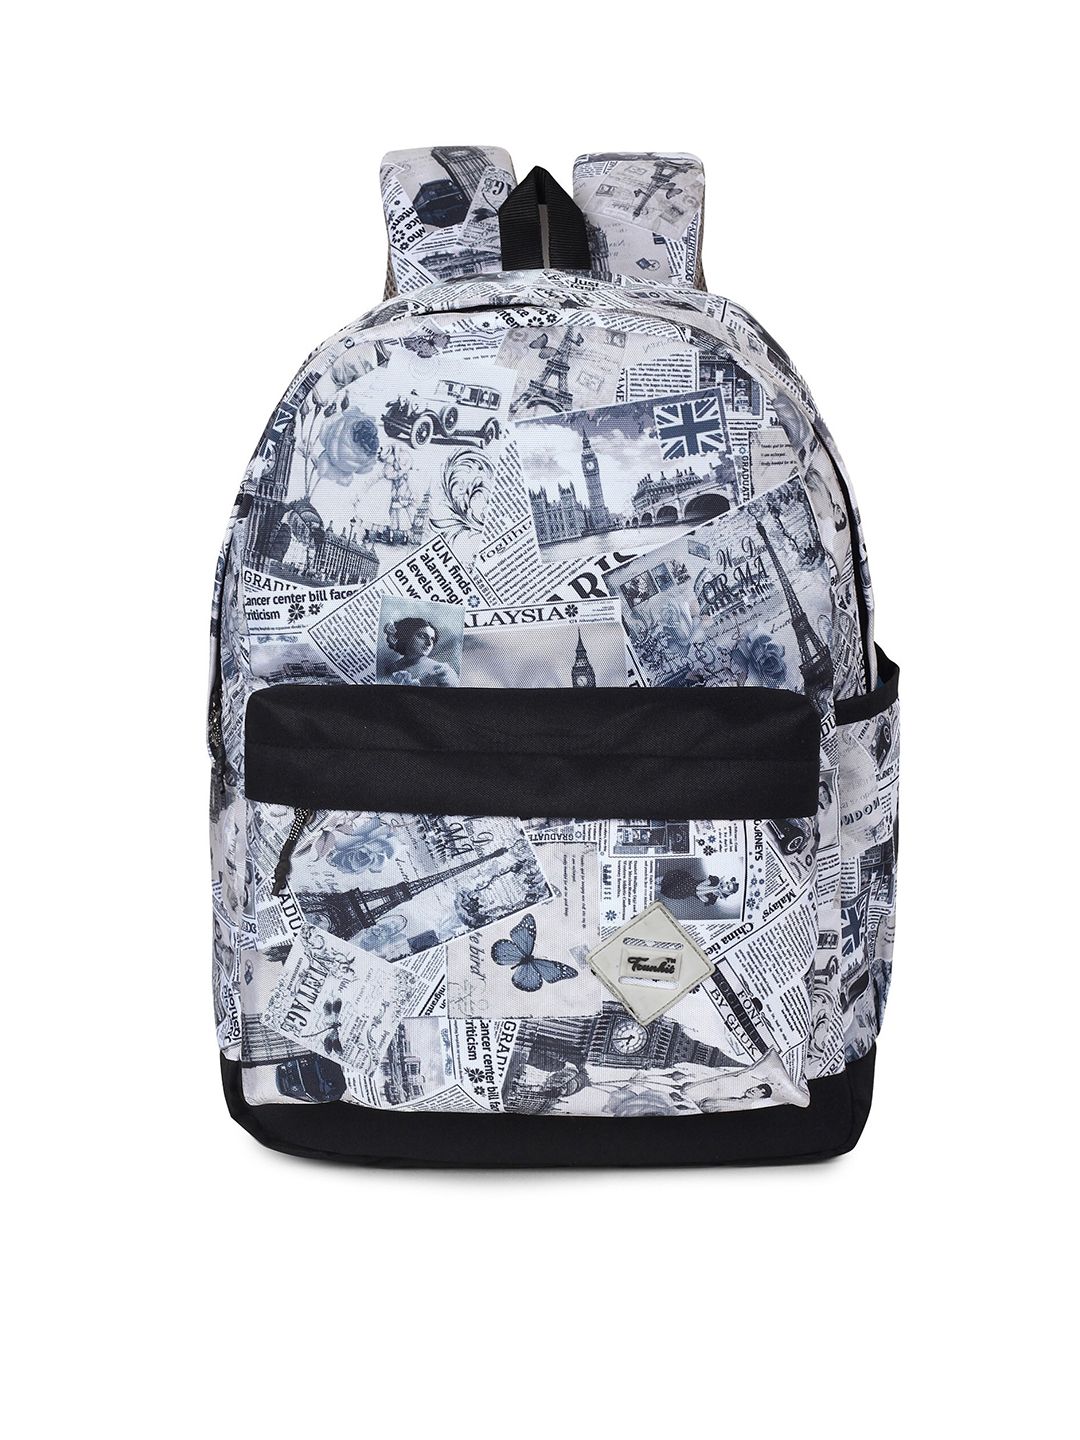 TRUNKIT Unisex Grey & Black Graphic Backpack Price in India